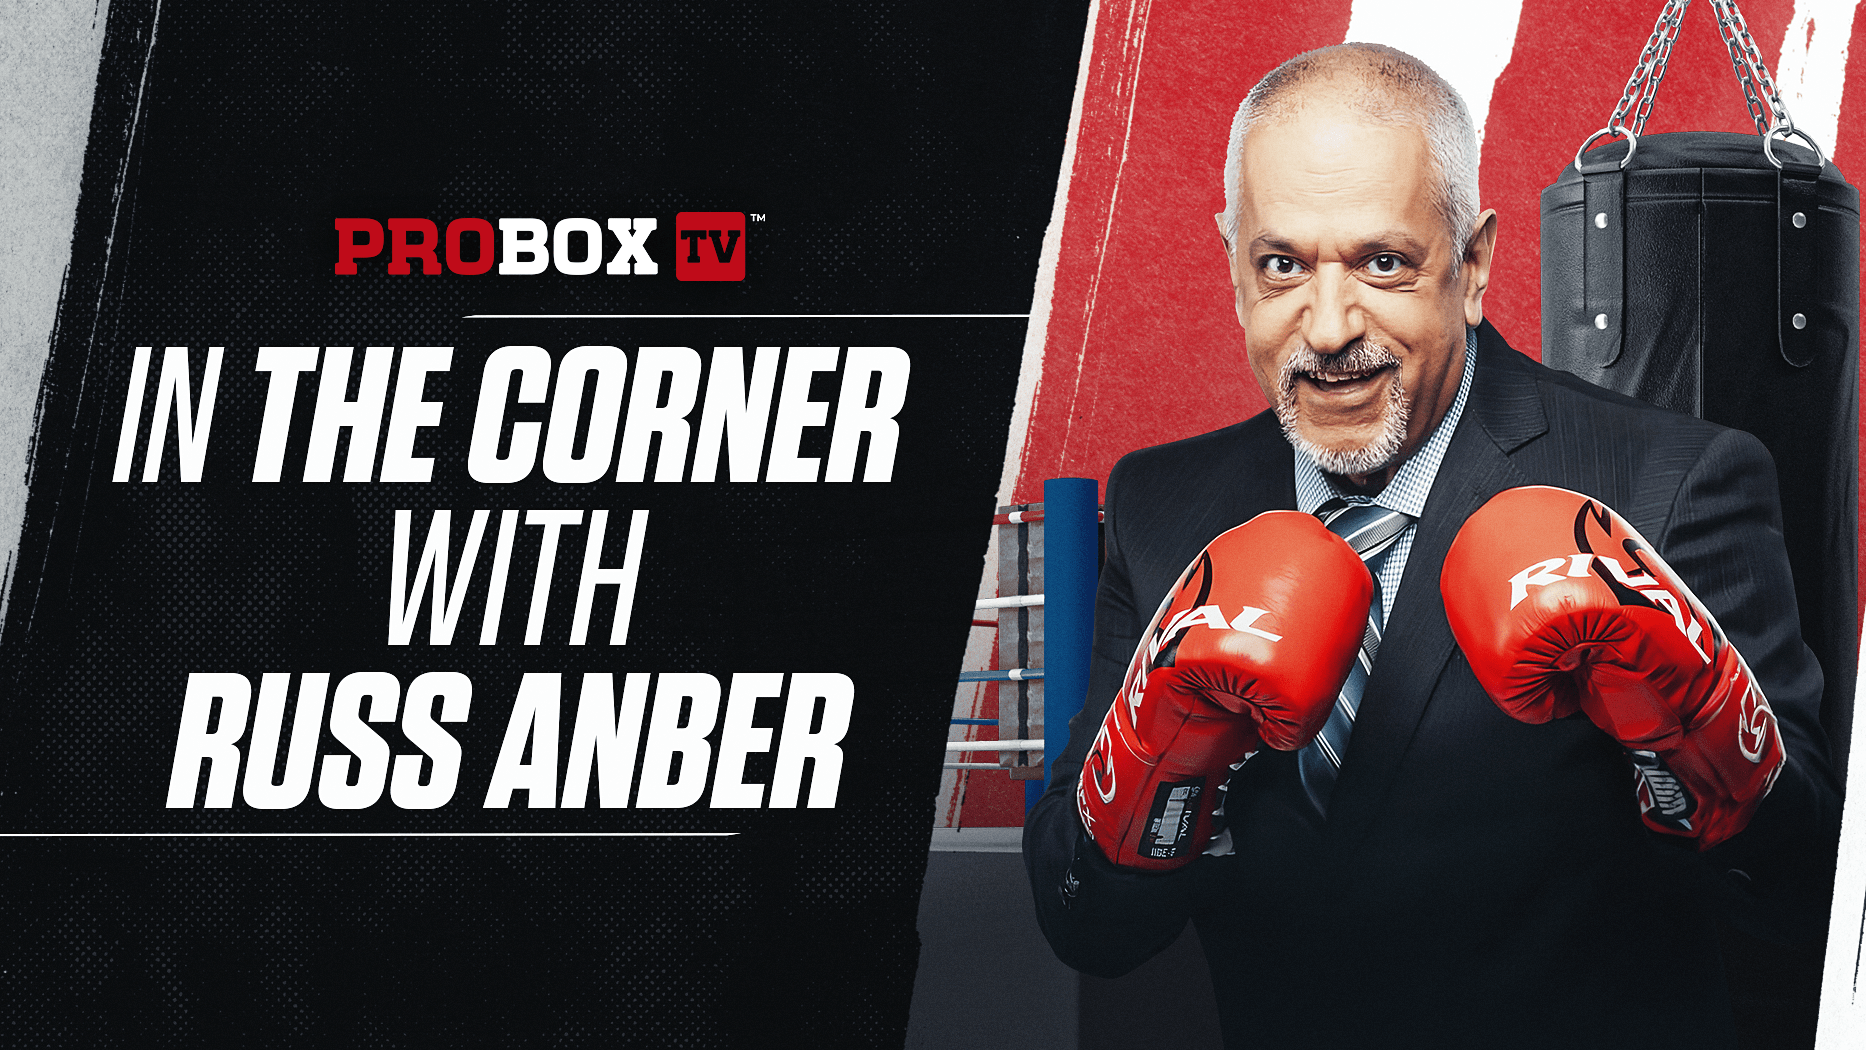 In The Corner with Russ Anber: Wilfred Benitez might have been second only to "Sugar" Ray Robinson